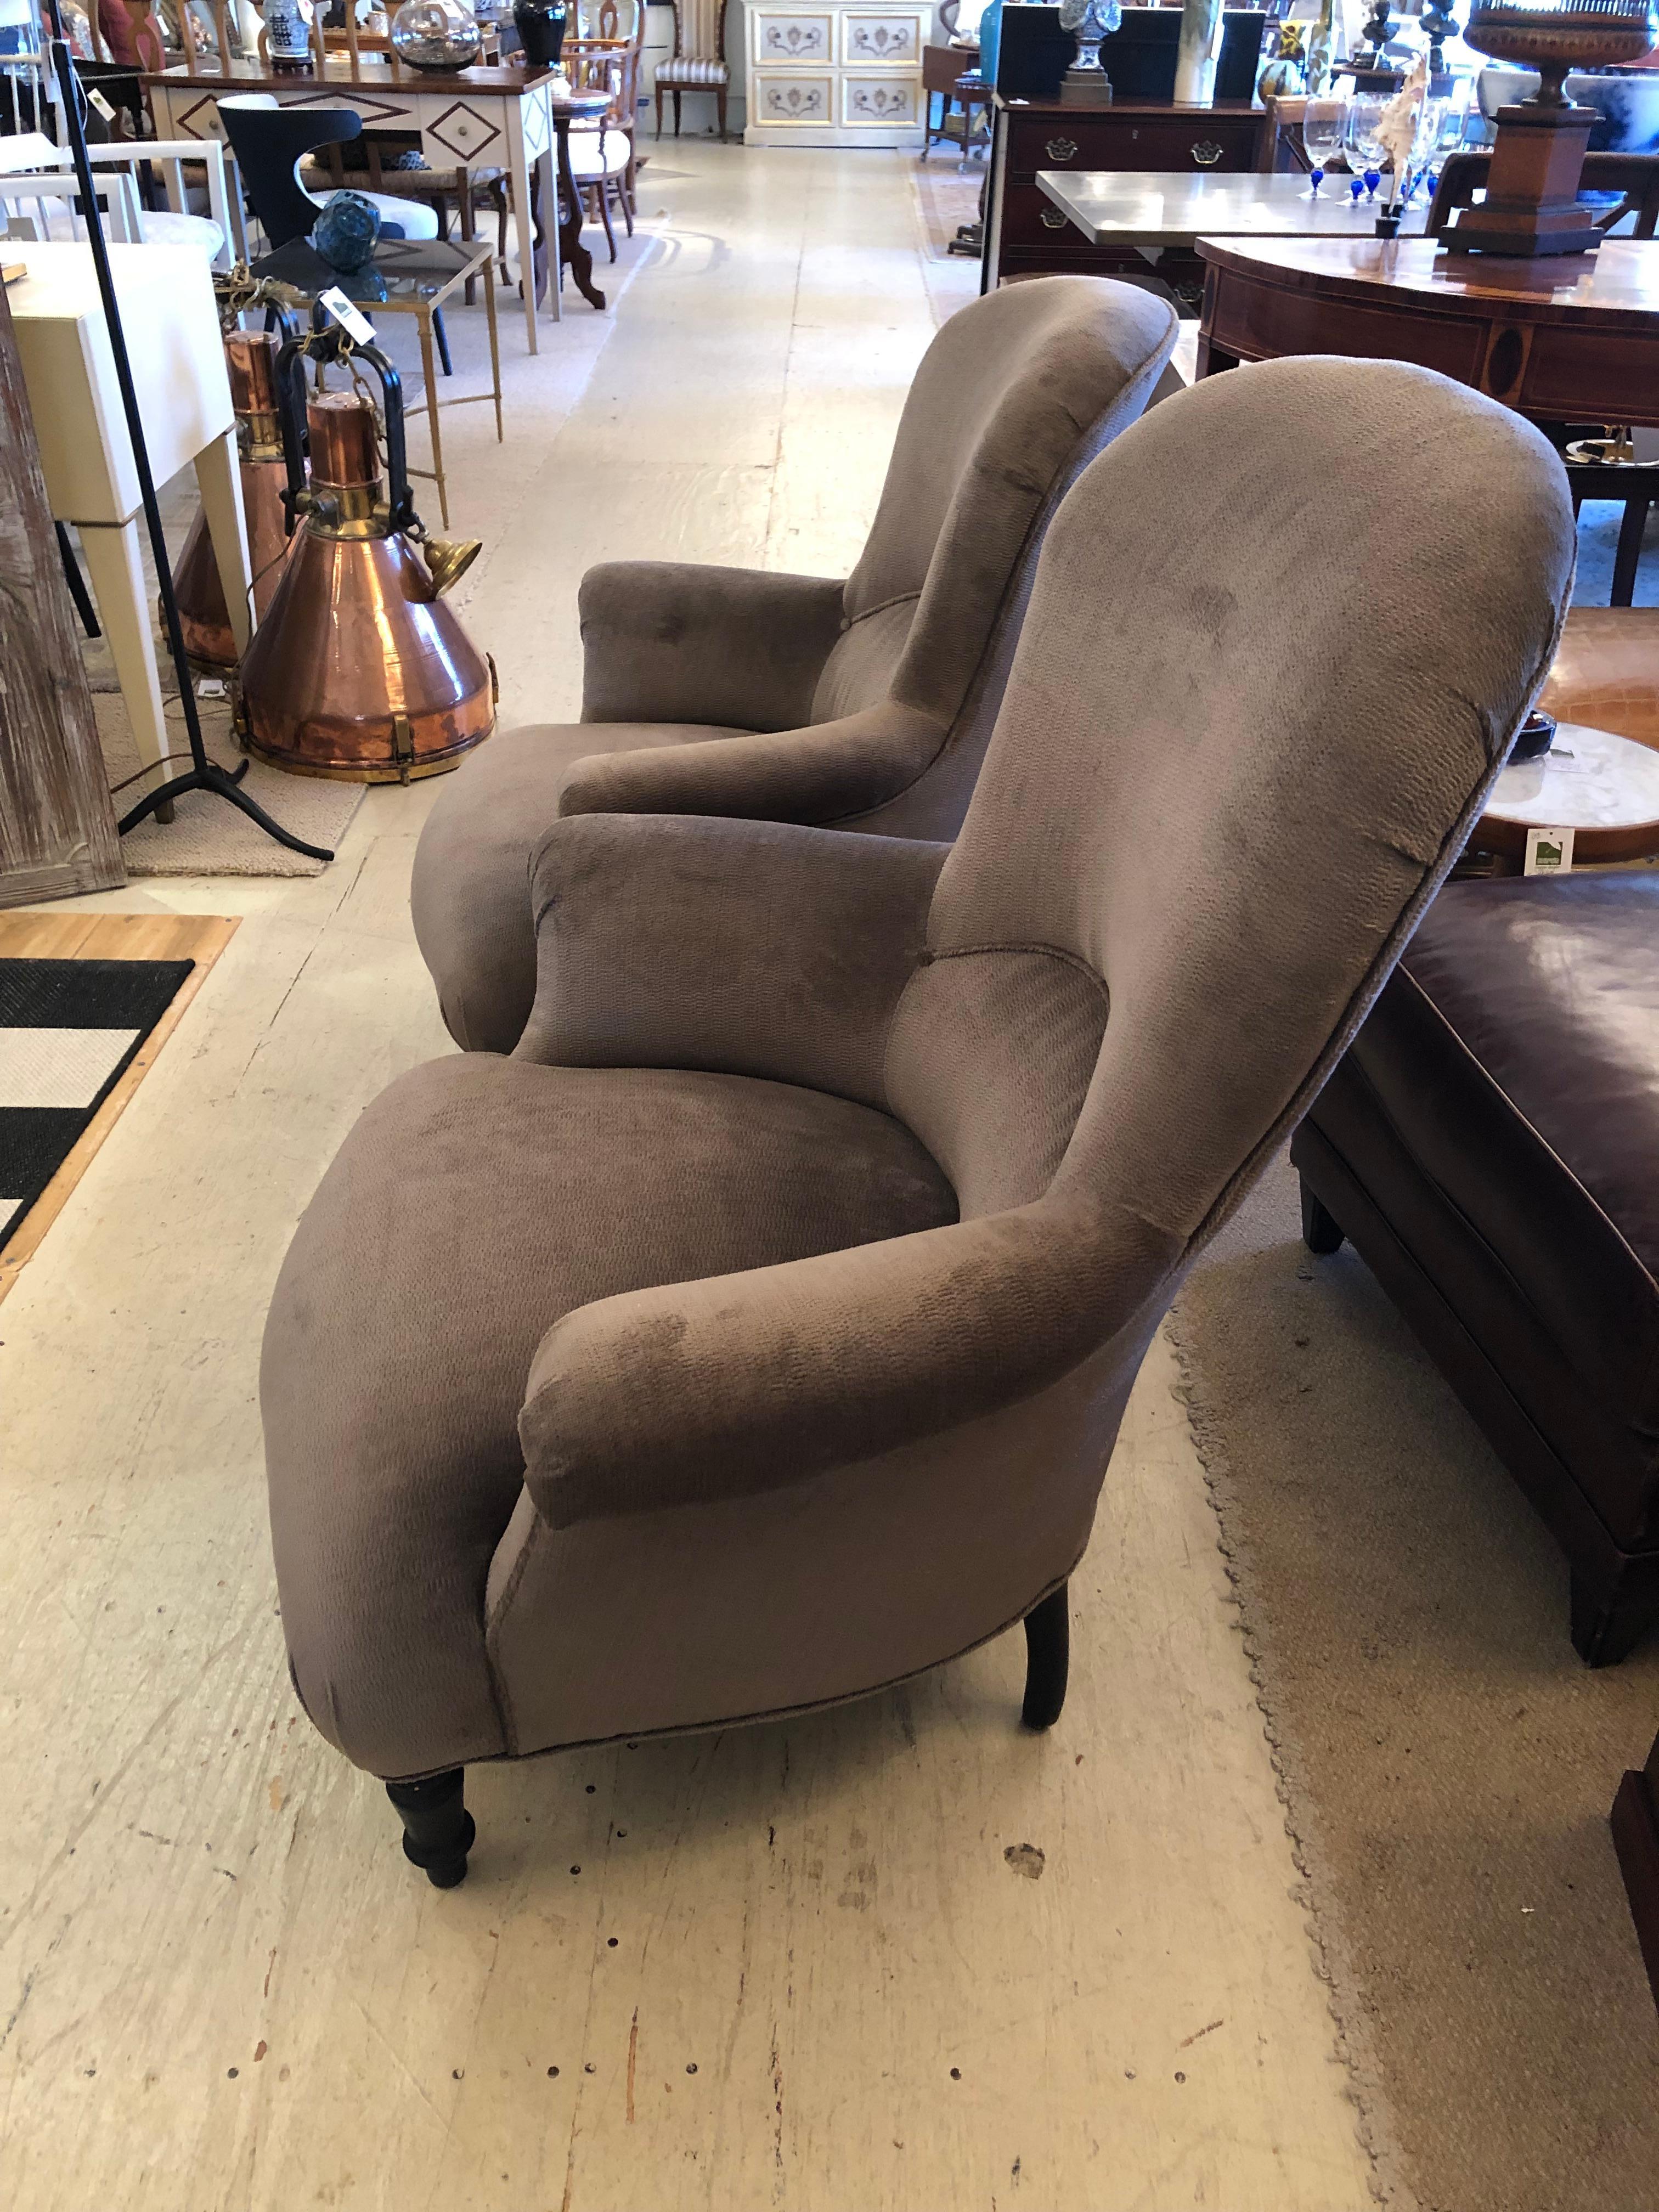 Wonderfully shaped mid 19th century French club chairs, beautifully upholstered in a soft mushroom color velvet chenille. We call them Mr. and Ms chairs., as one is slightly shorter and smaller than the other.
Slightly smaller 